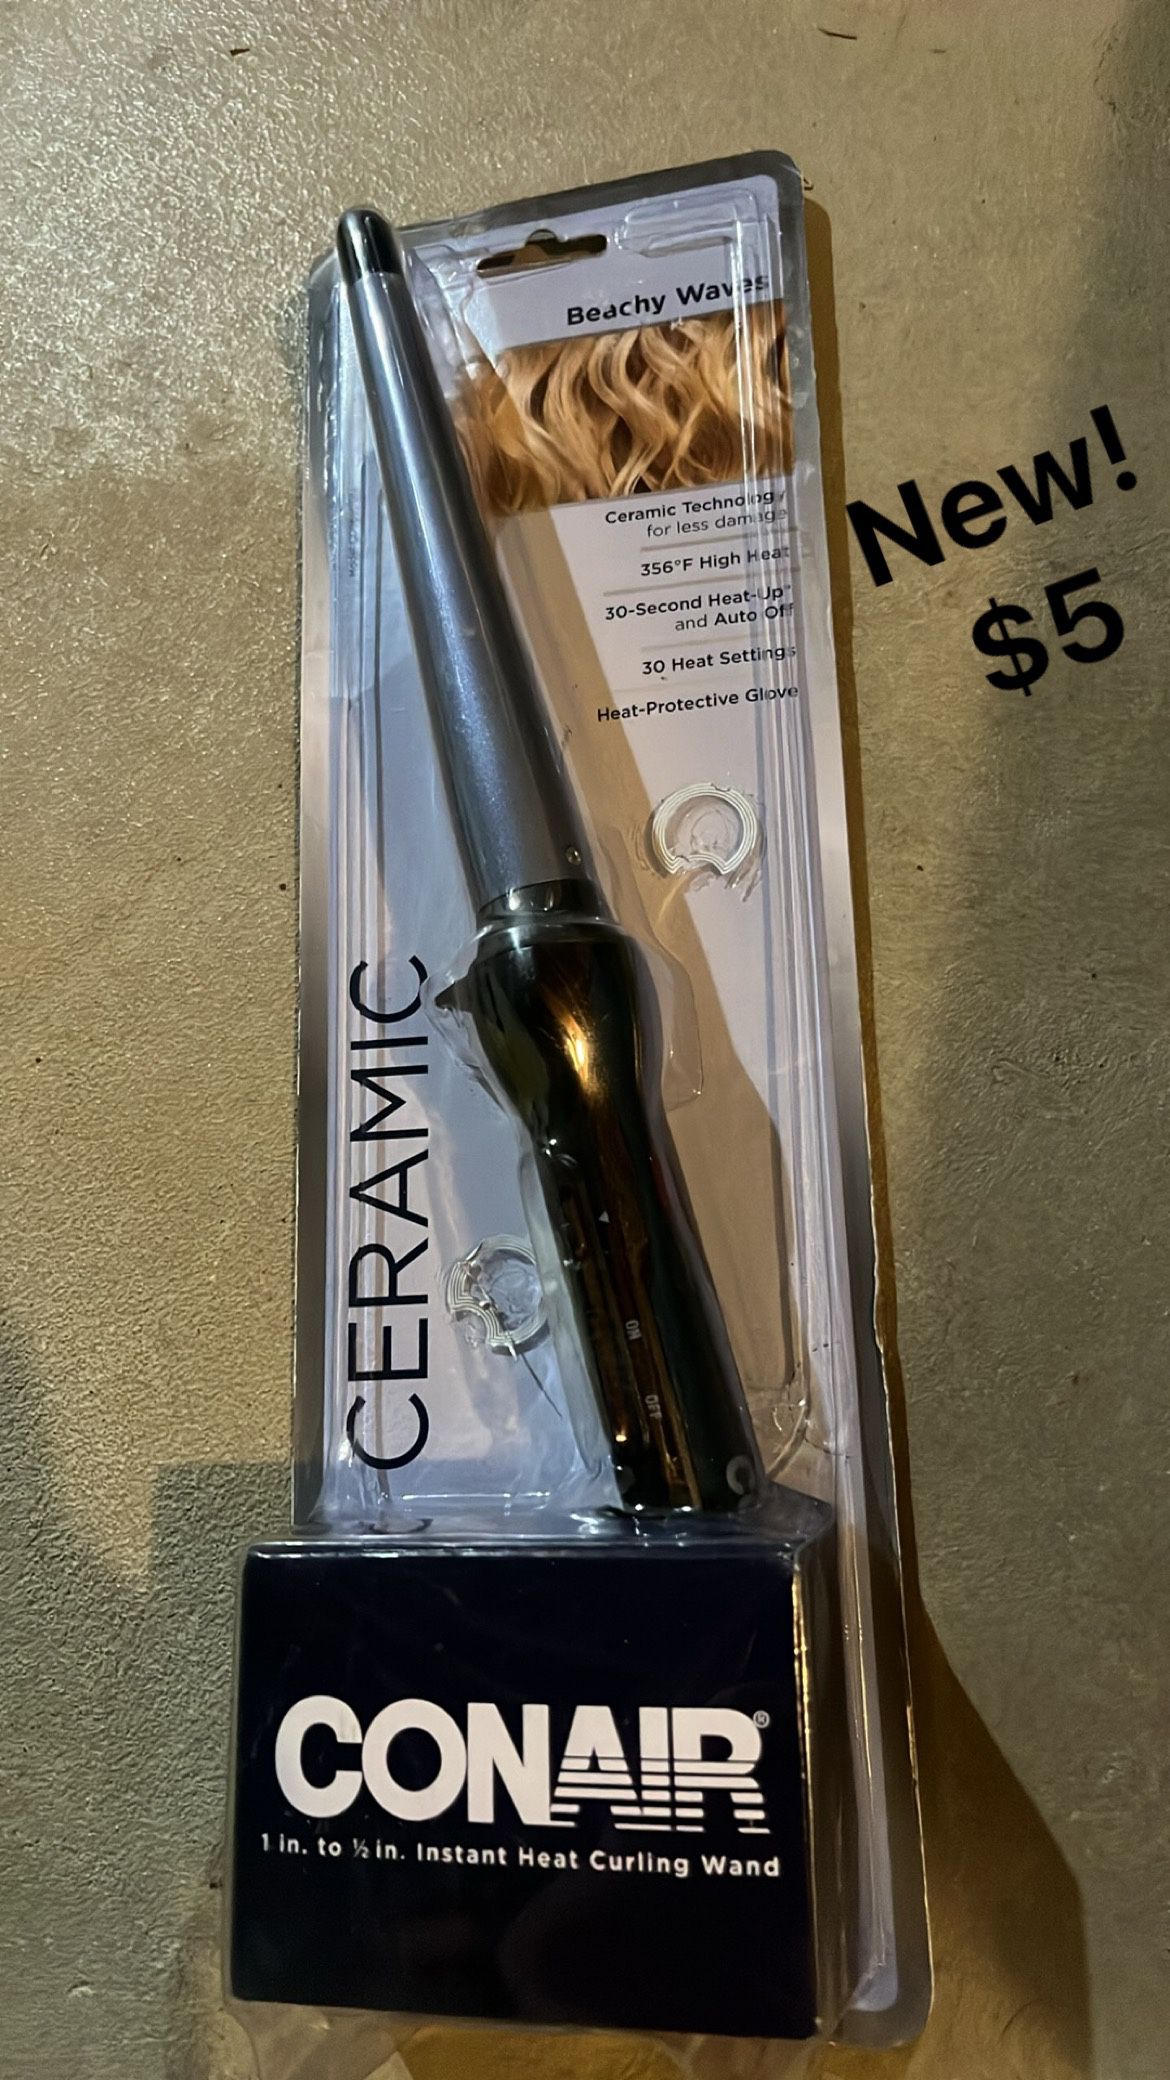 New! Curling Iron 